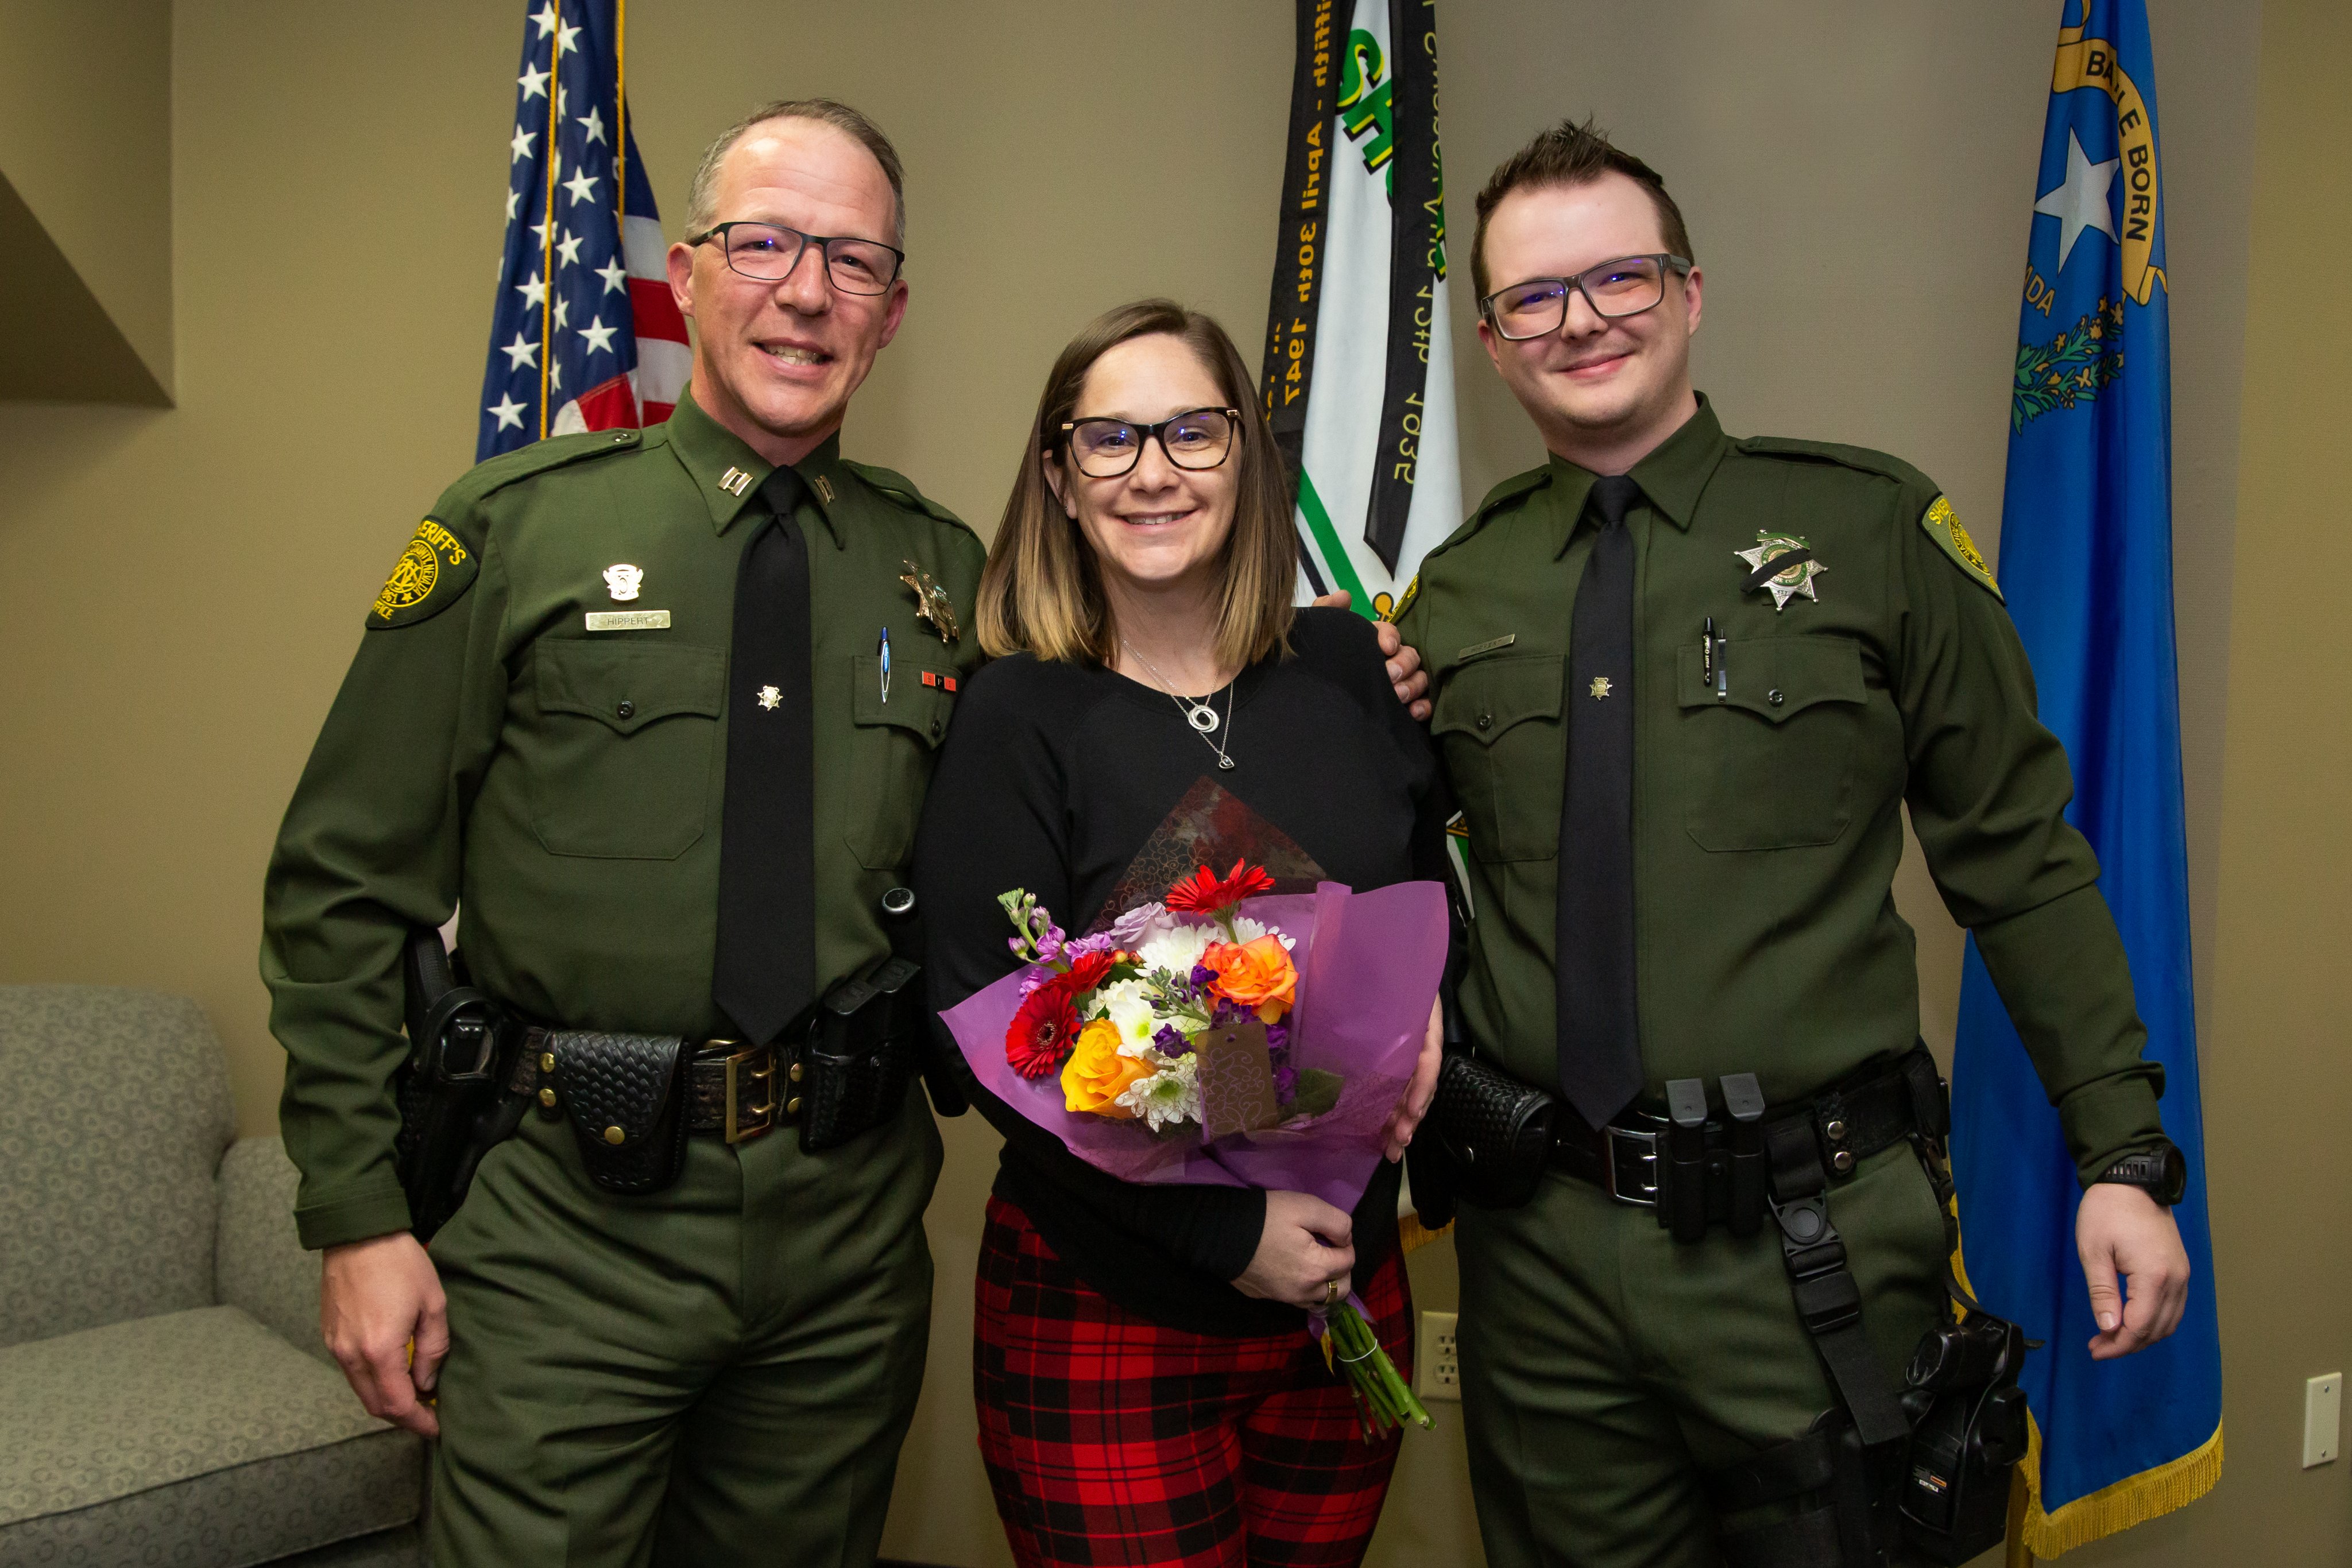 Washoe Sheriff On Twitter Congratulations To Dennis Hippert On His Promotion From Lieutenant 